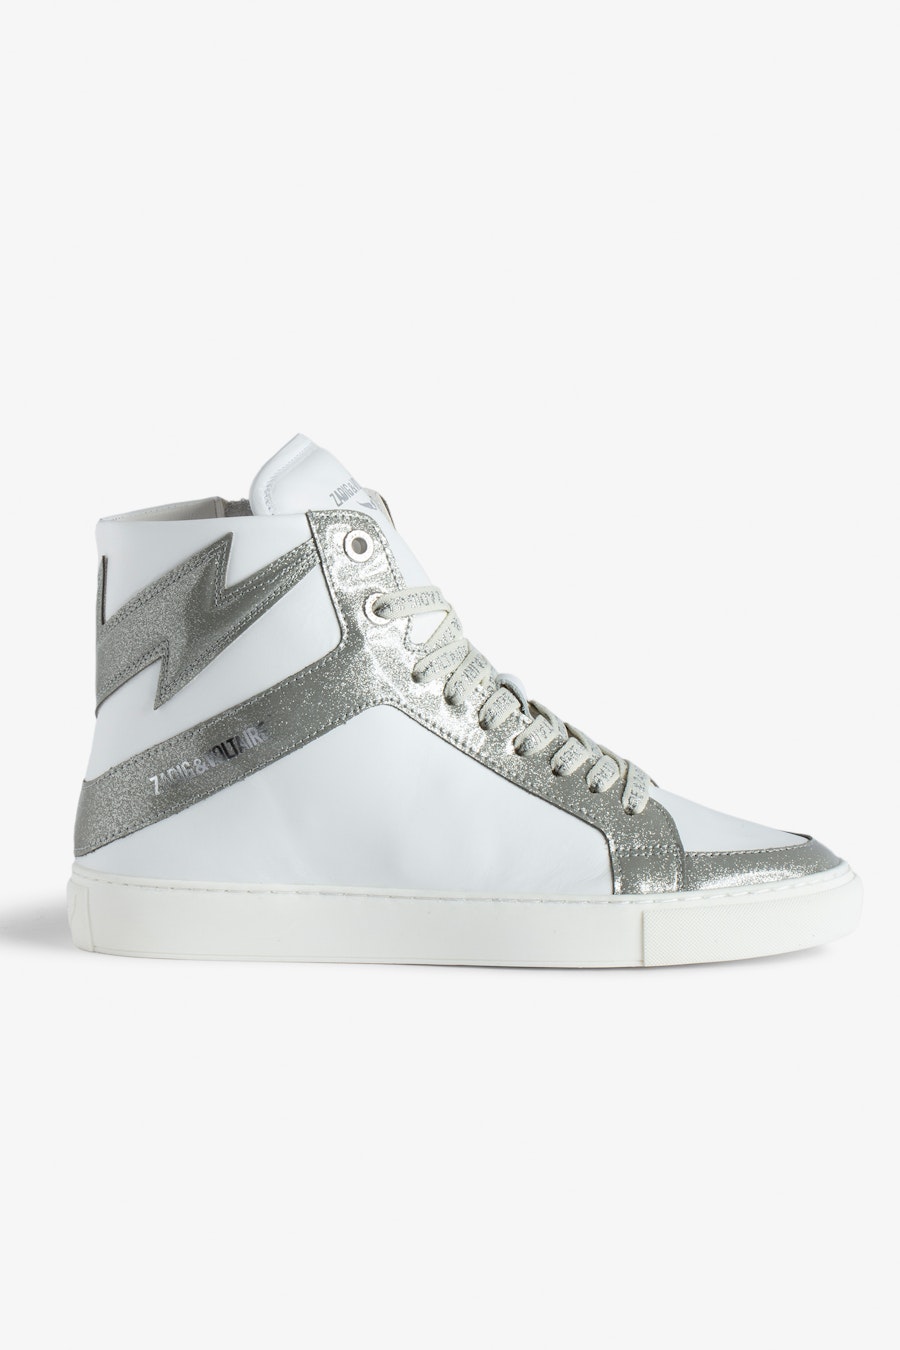 ZADIG&VOLTAIRE ZV1747 High Flash High-Top Trainers